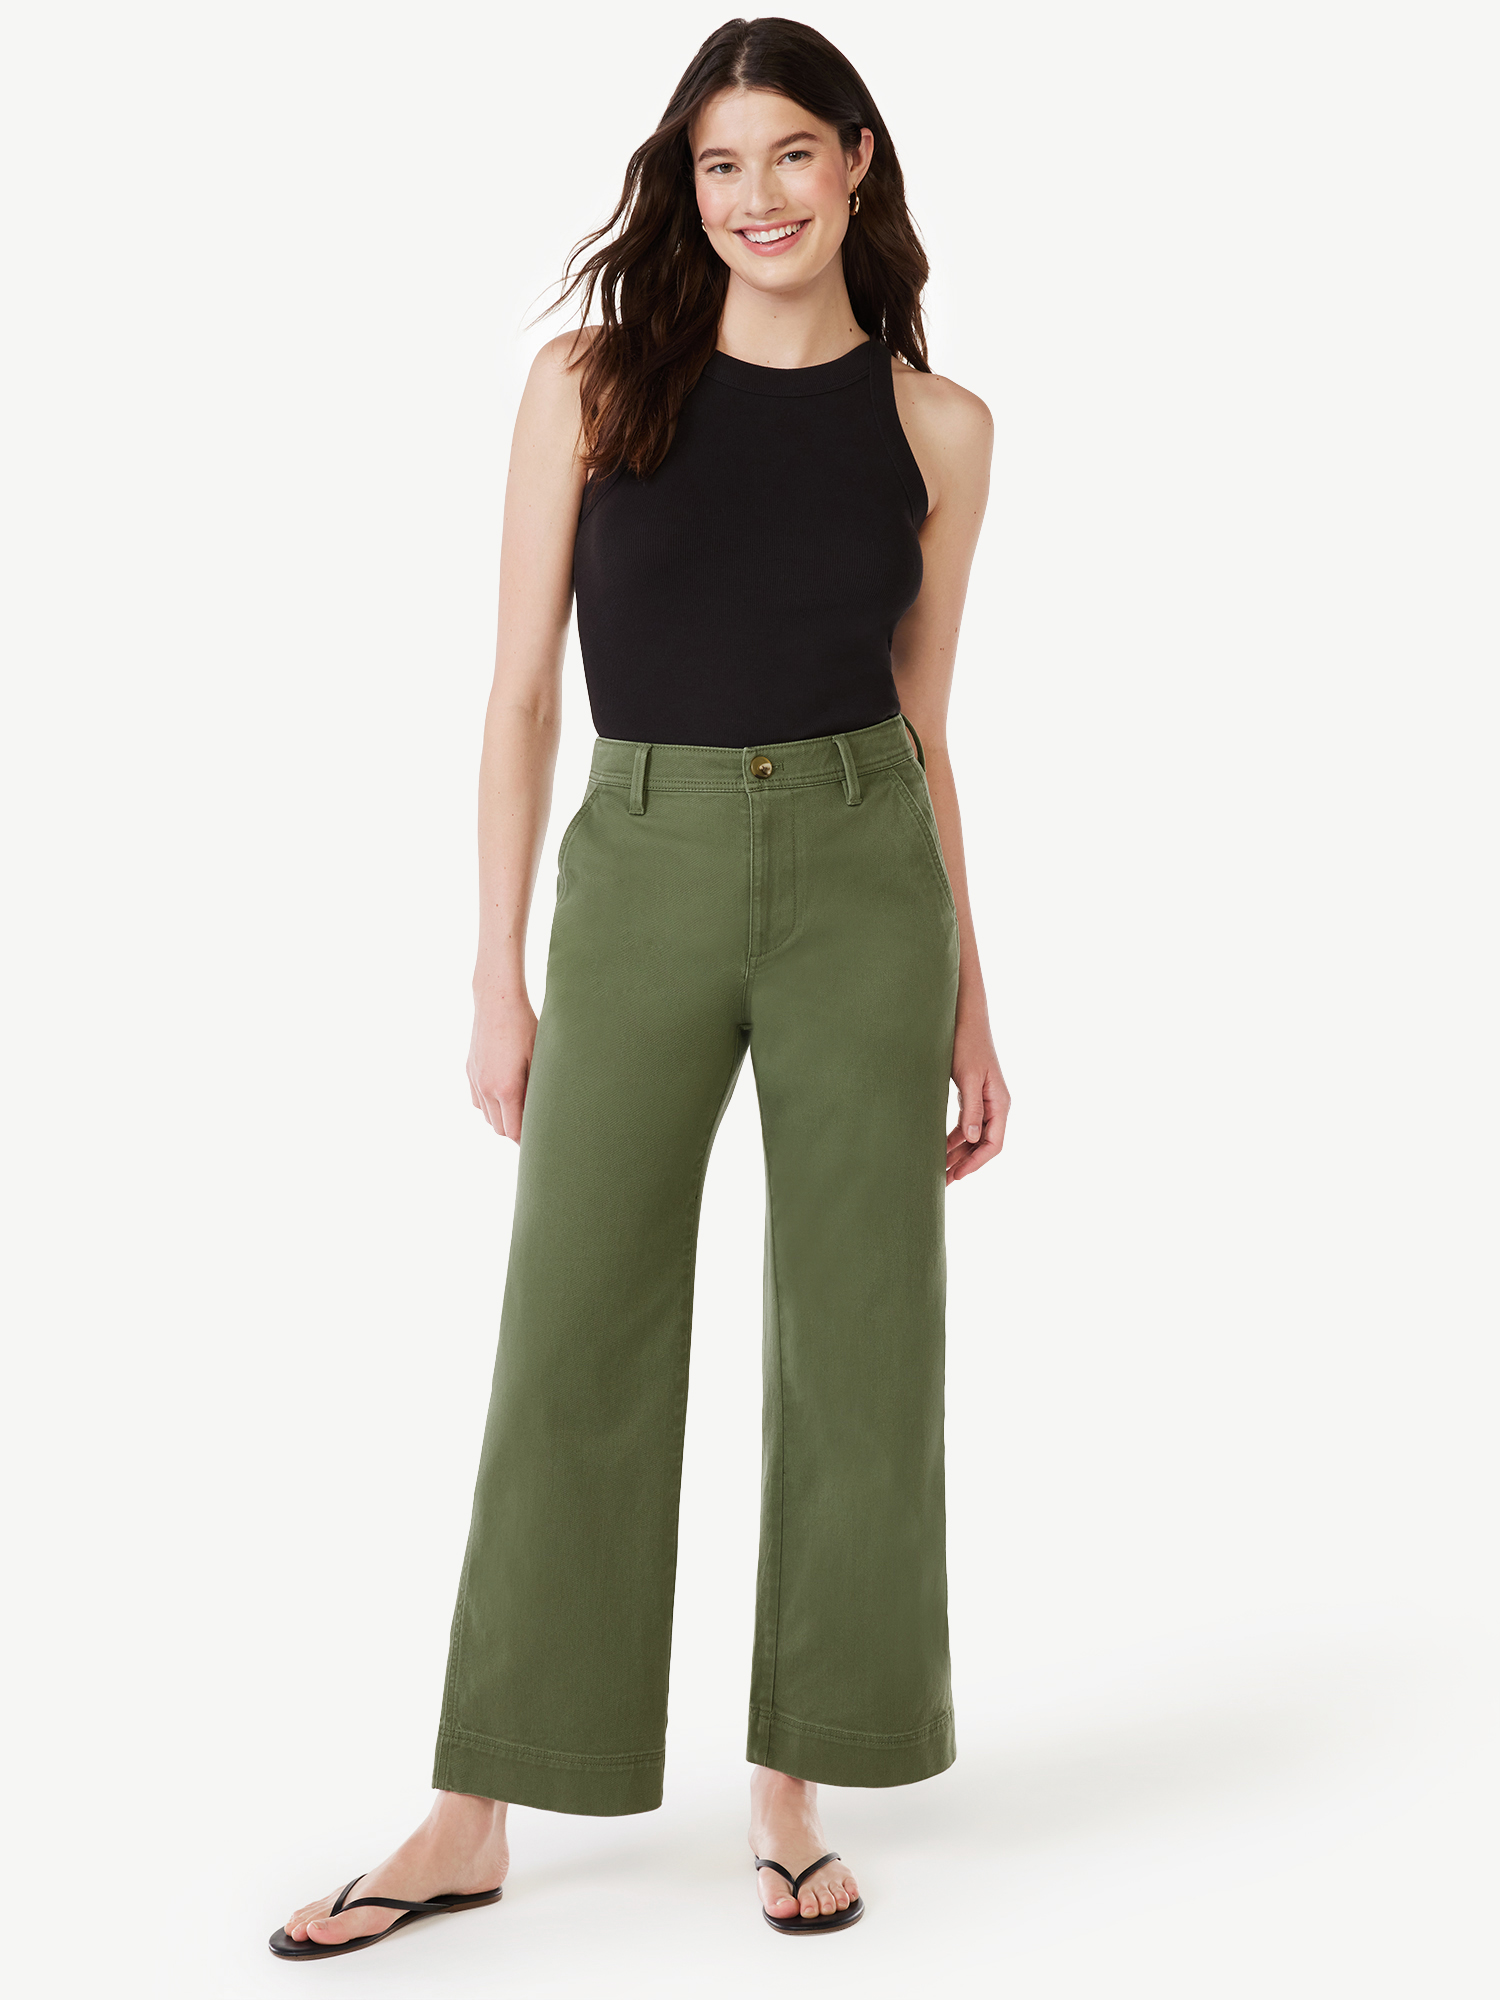 Free Assembly Women's Utility Wide Leg Straight Pants - image 2 of 6